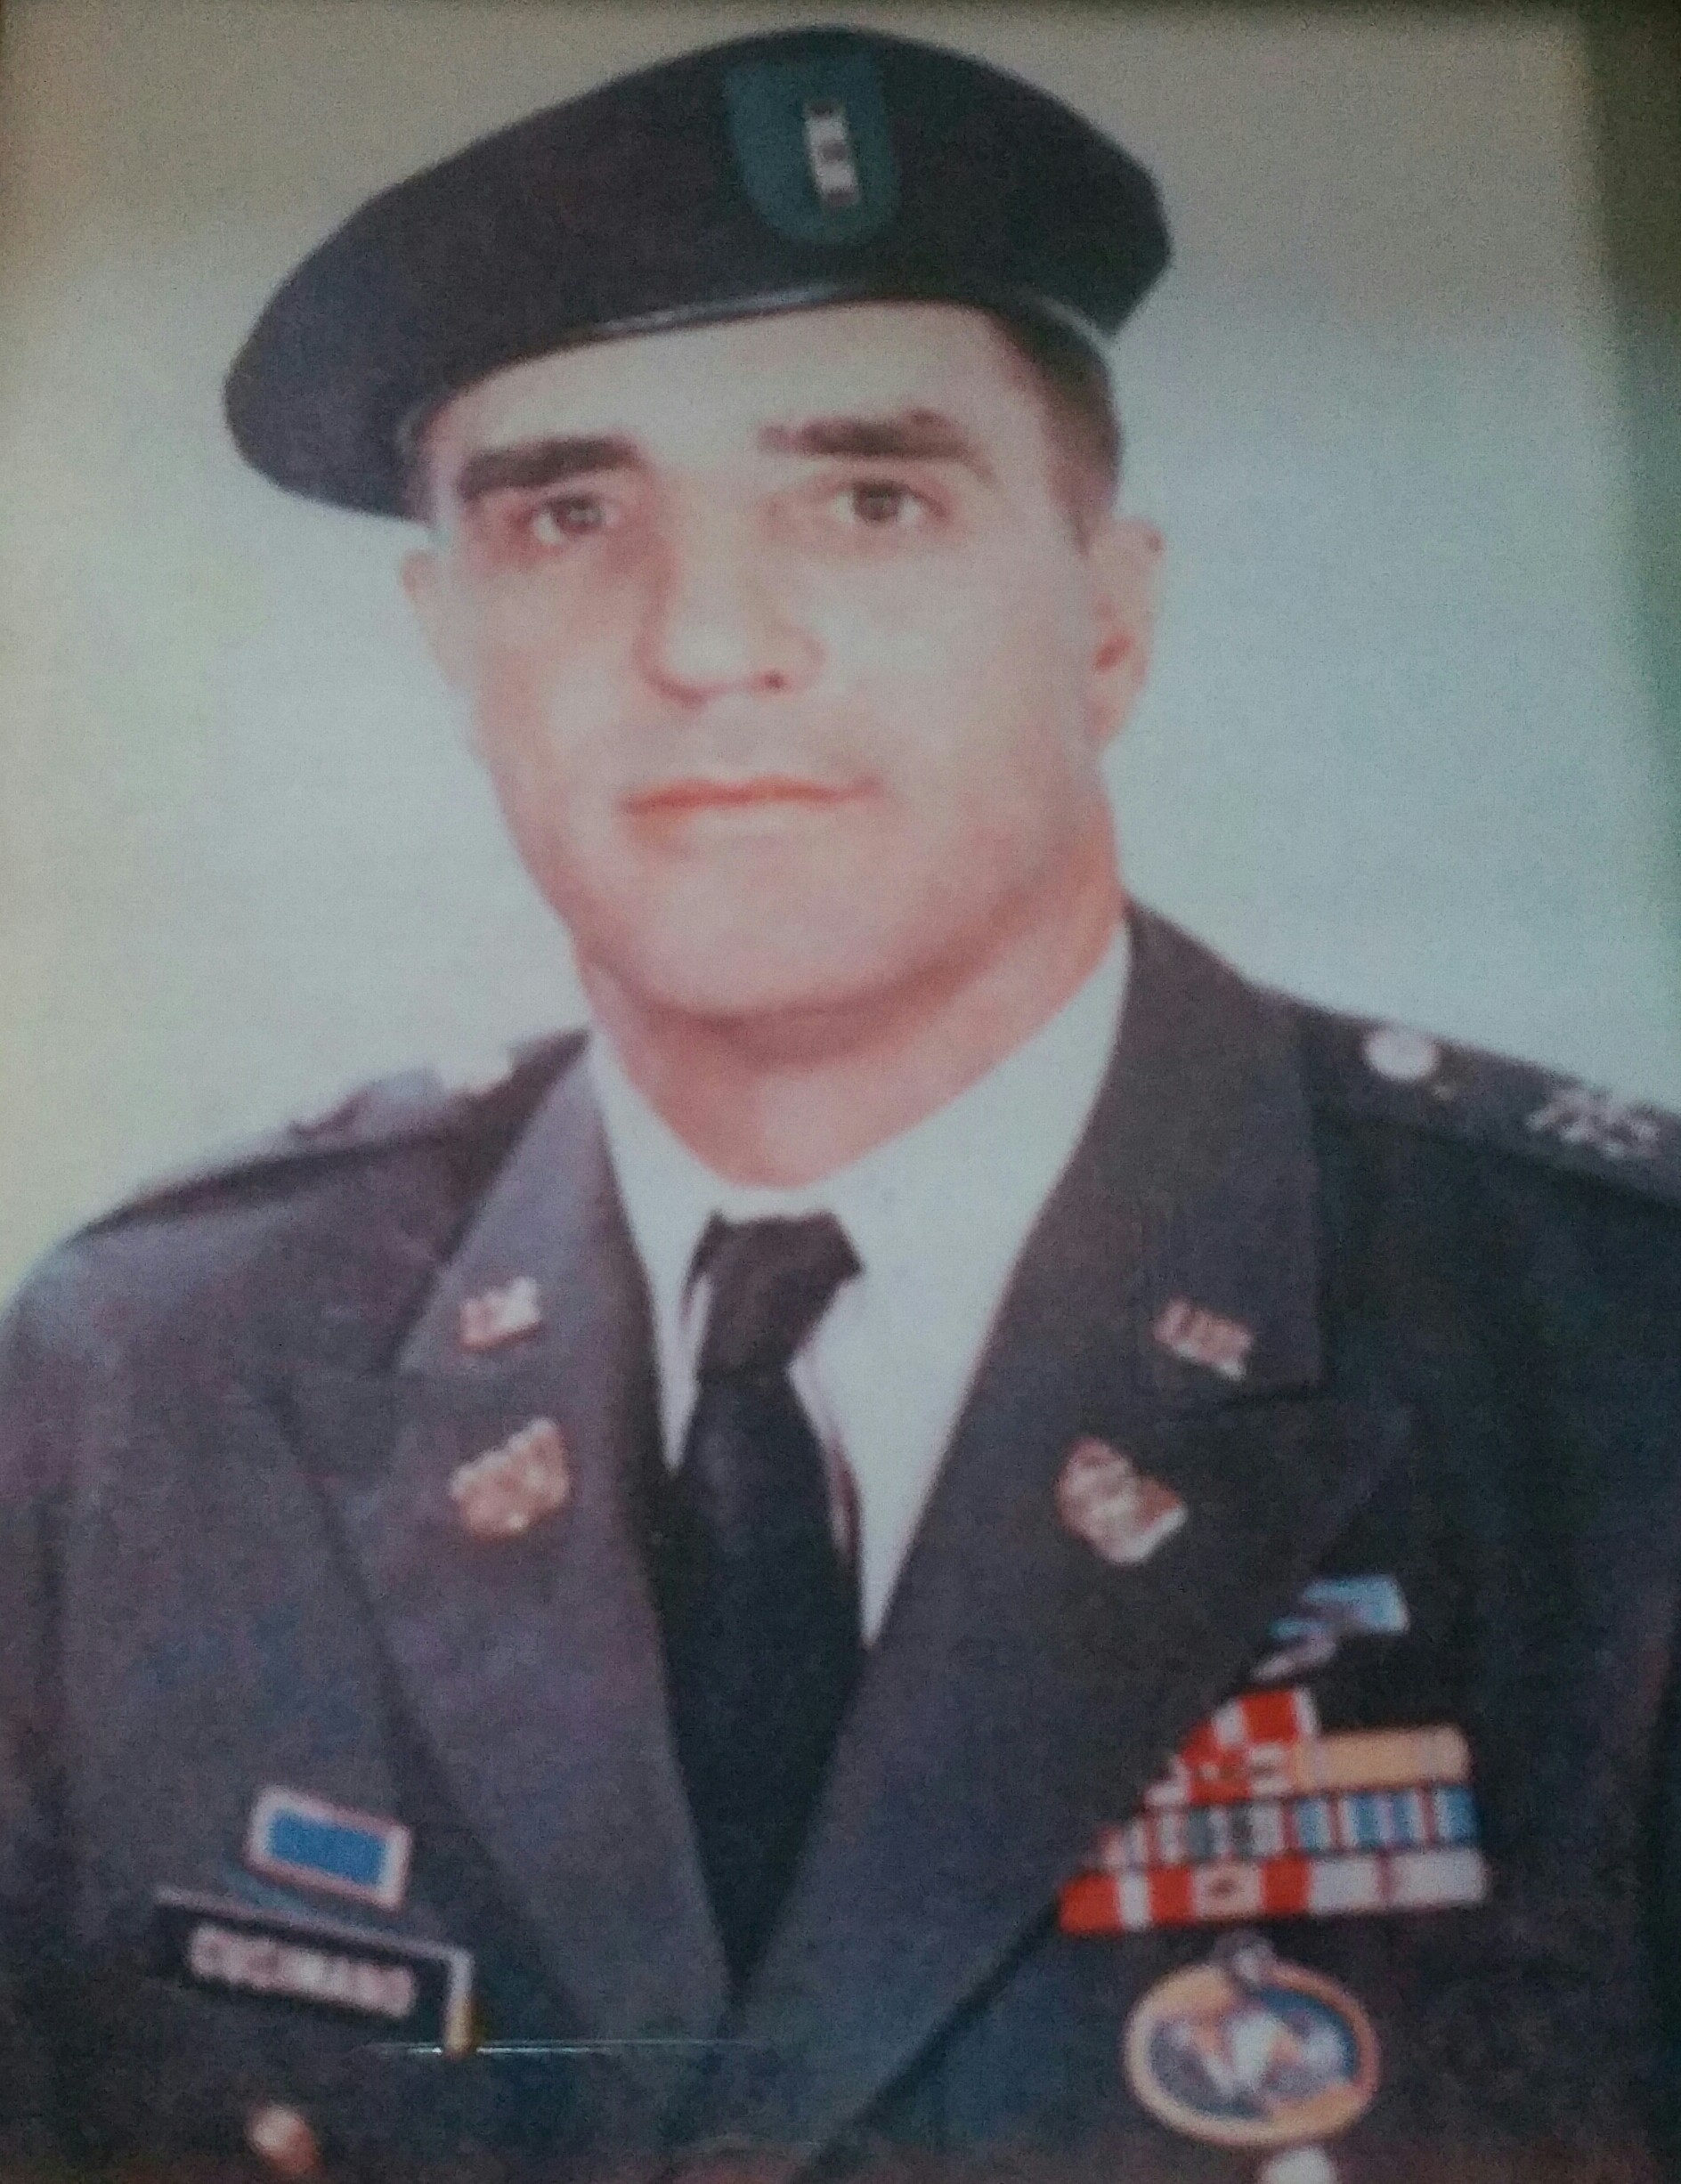 Anthony James Cusimano, Army, CW4, served 28 years